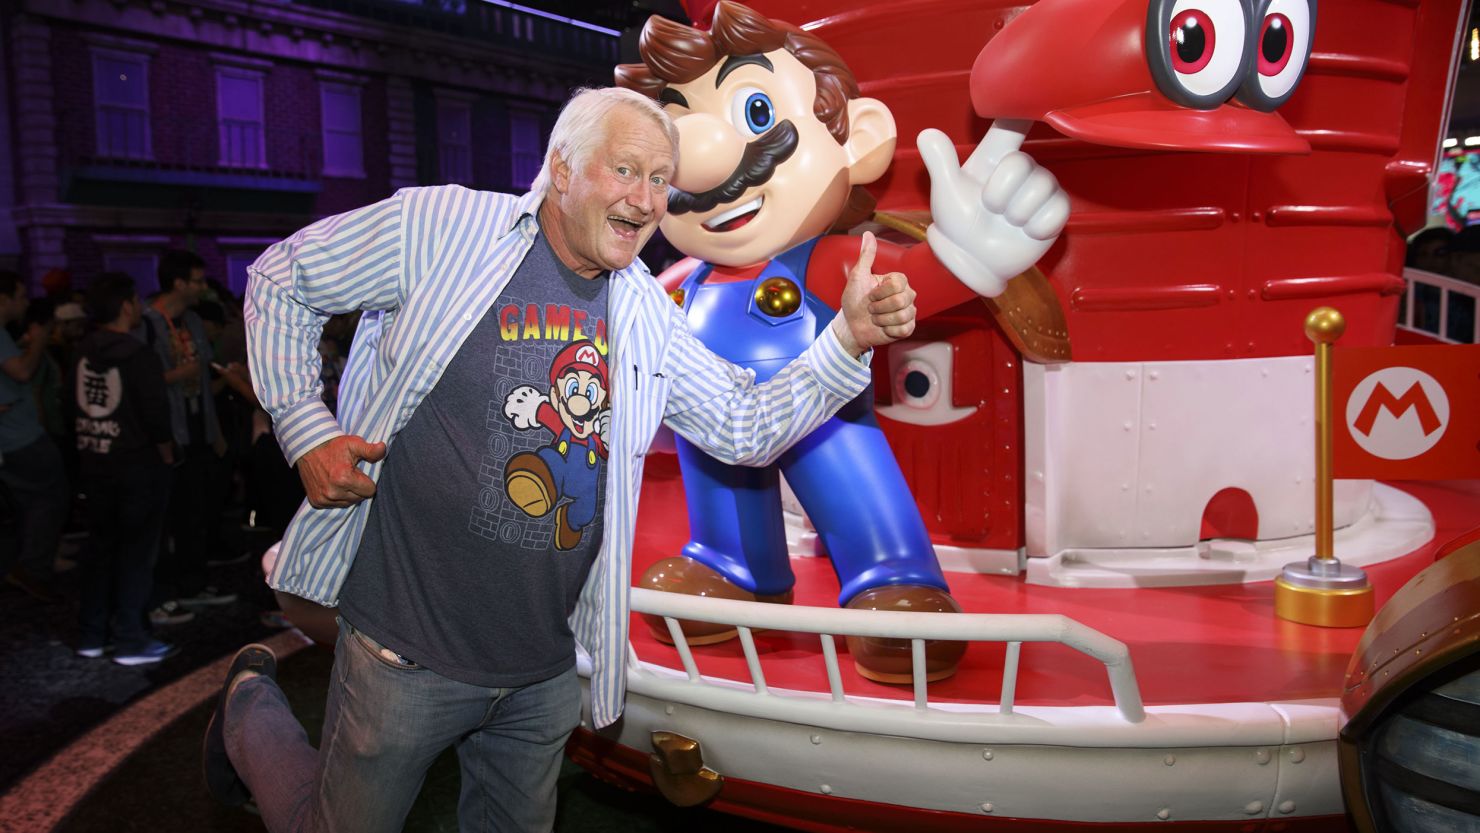 Actor Charles Martinet, the voice of Nintendo Co.'s Mario, stands for a photograph with Mario dduring the E3 Electronic Entertainment Expo in Los Angeles, California, U.S., on Tuesday, June 13, 2017. Nintendo announced a slate of new titles for its new hybrid console Switch, moving to capitalize on early excitement for its newest video-game system. Photographer: Patrick T. Fallon/Bloomberg via Getty Images